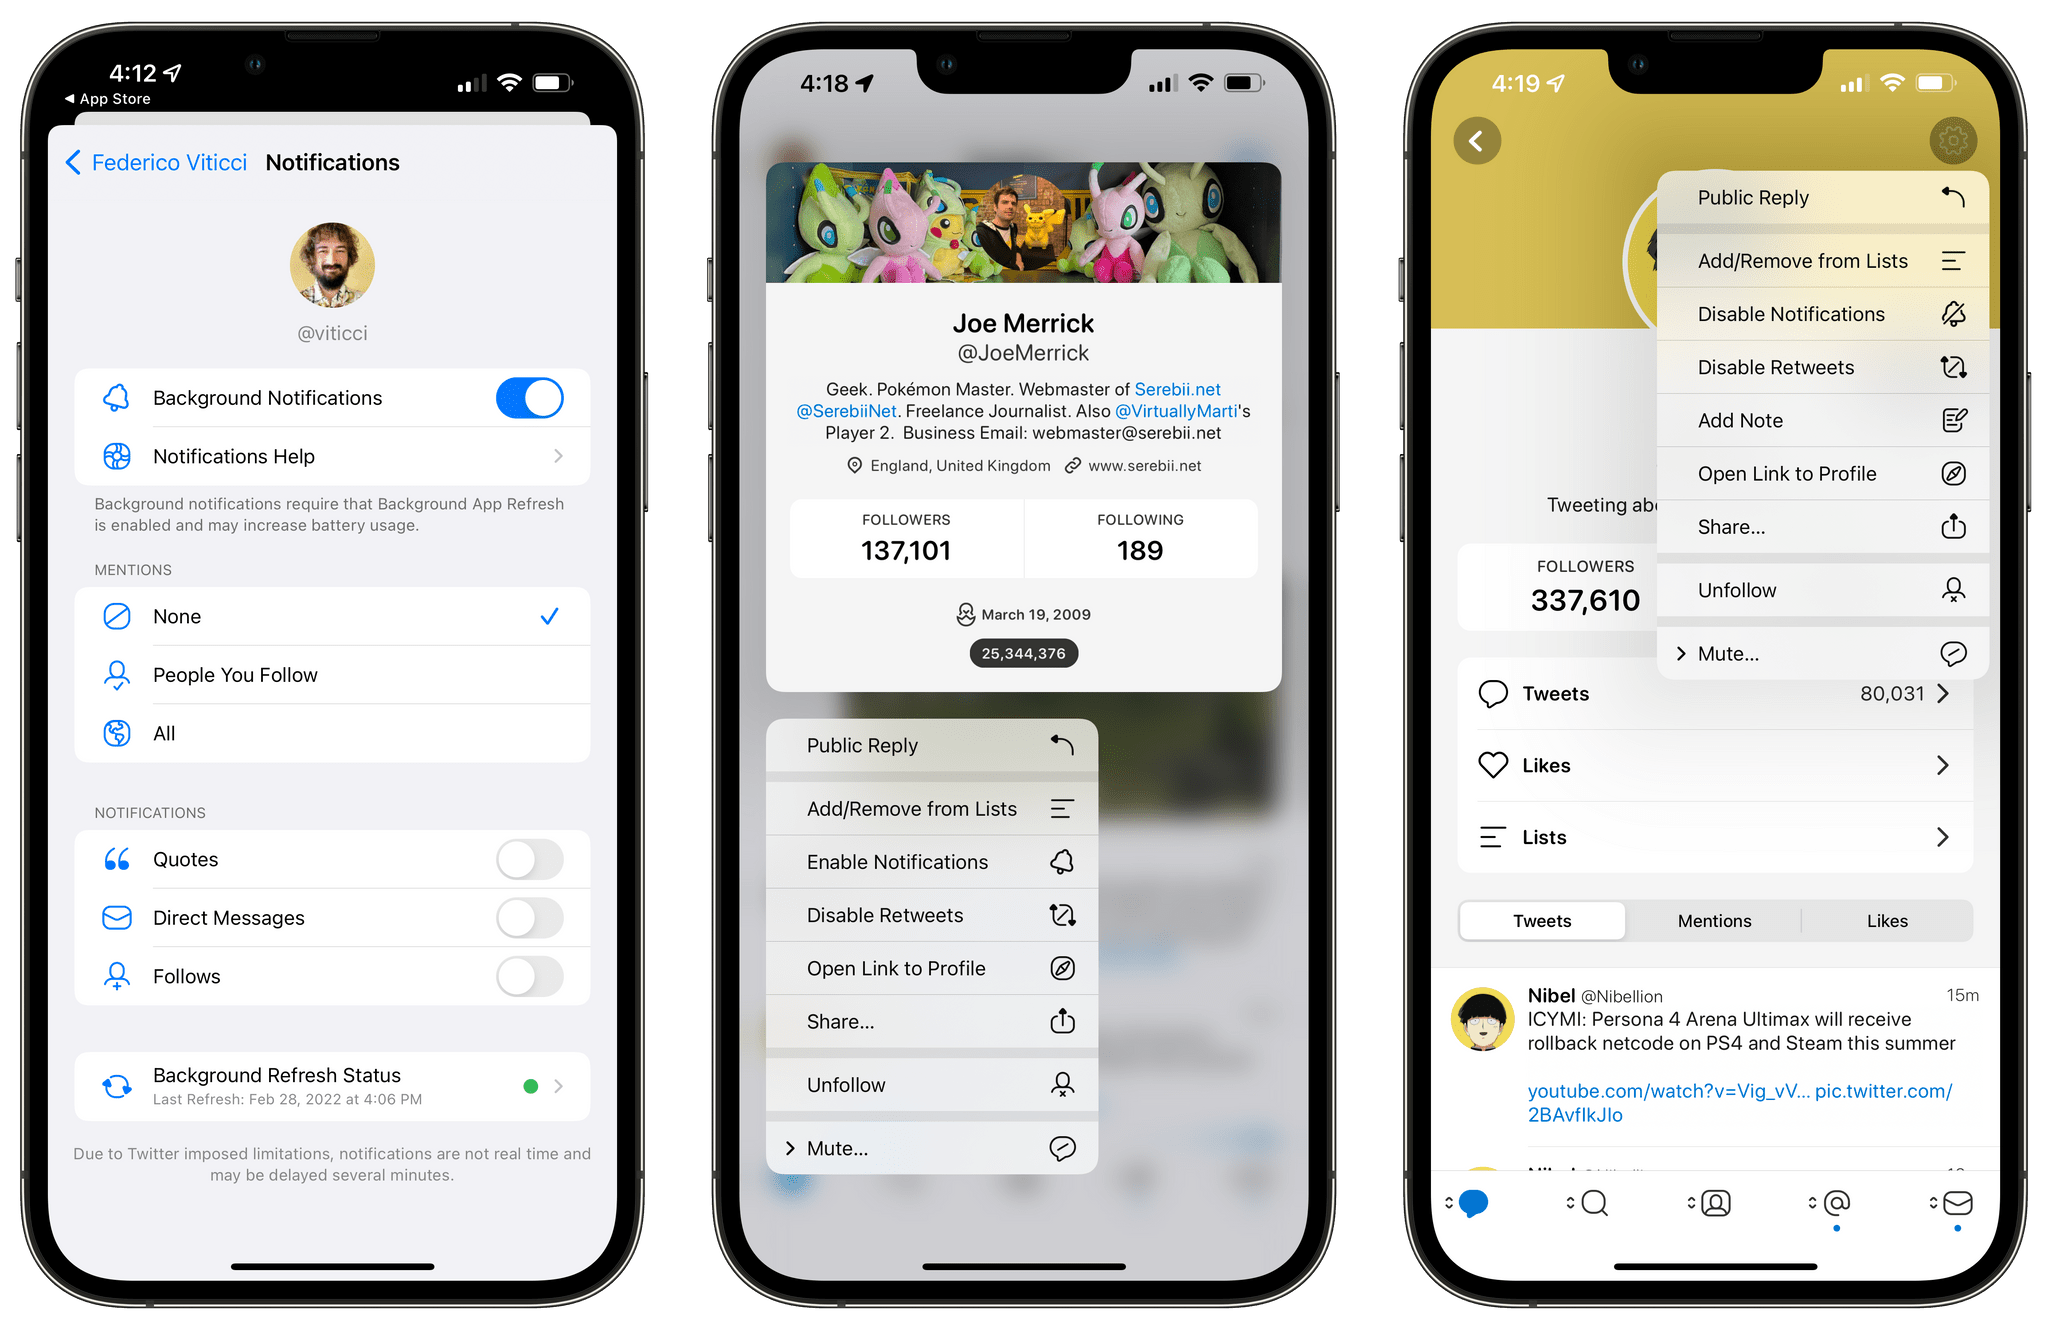 Enabling notifications for specific users.